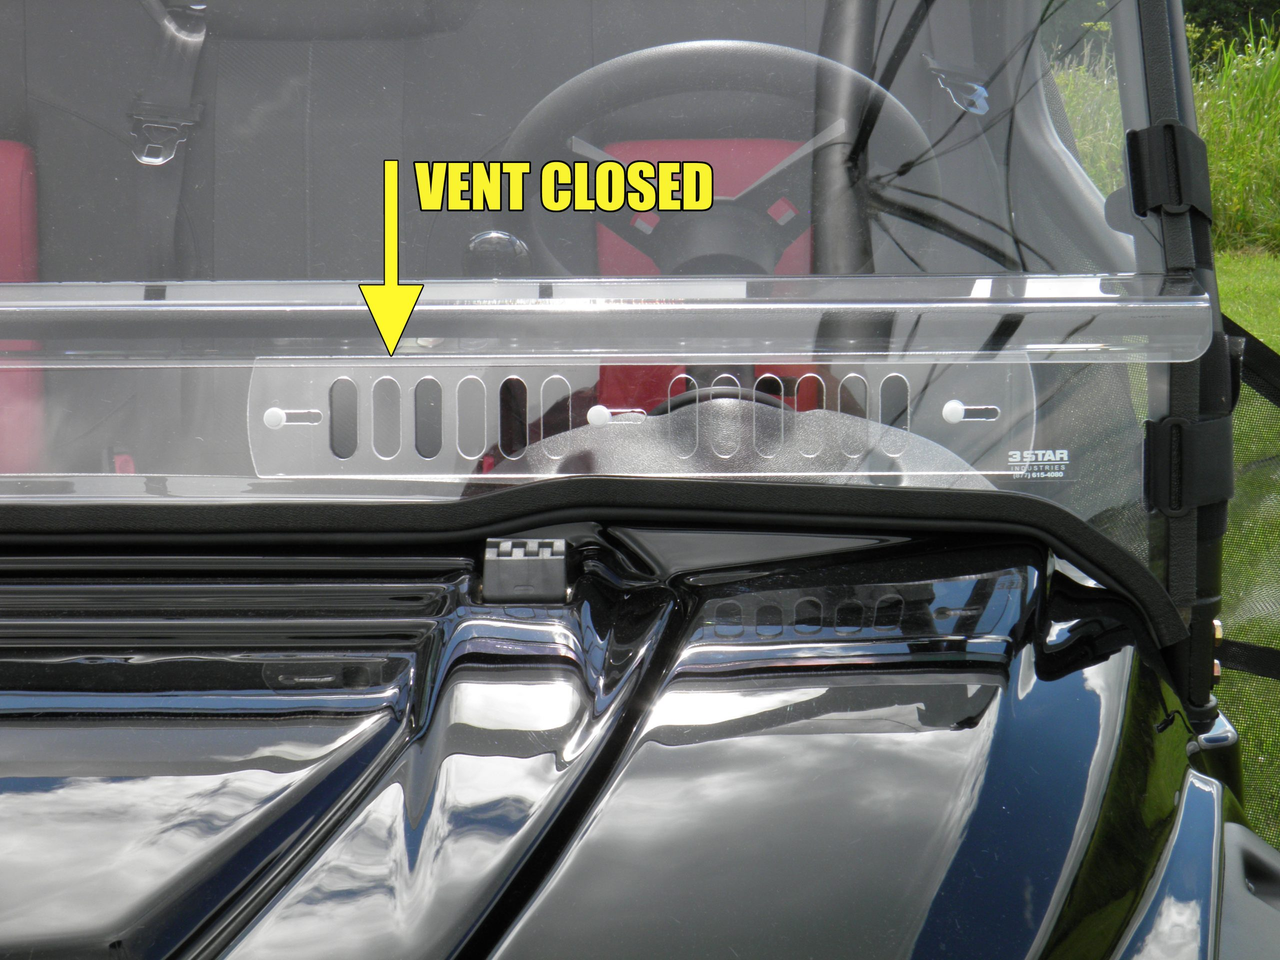 3 Star side x side can-am maverick and max windshield vents closed